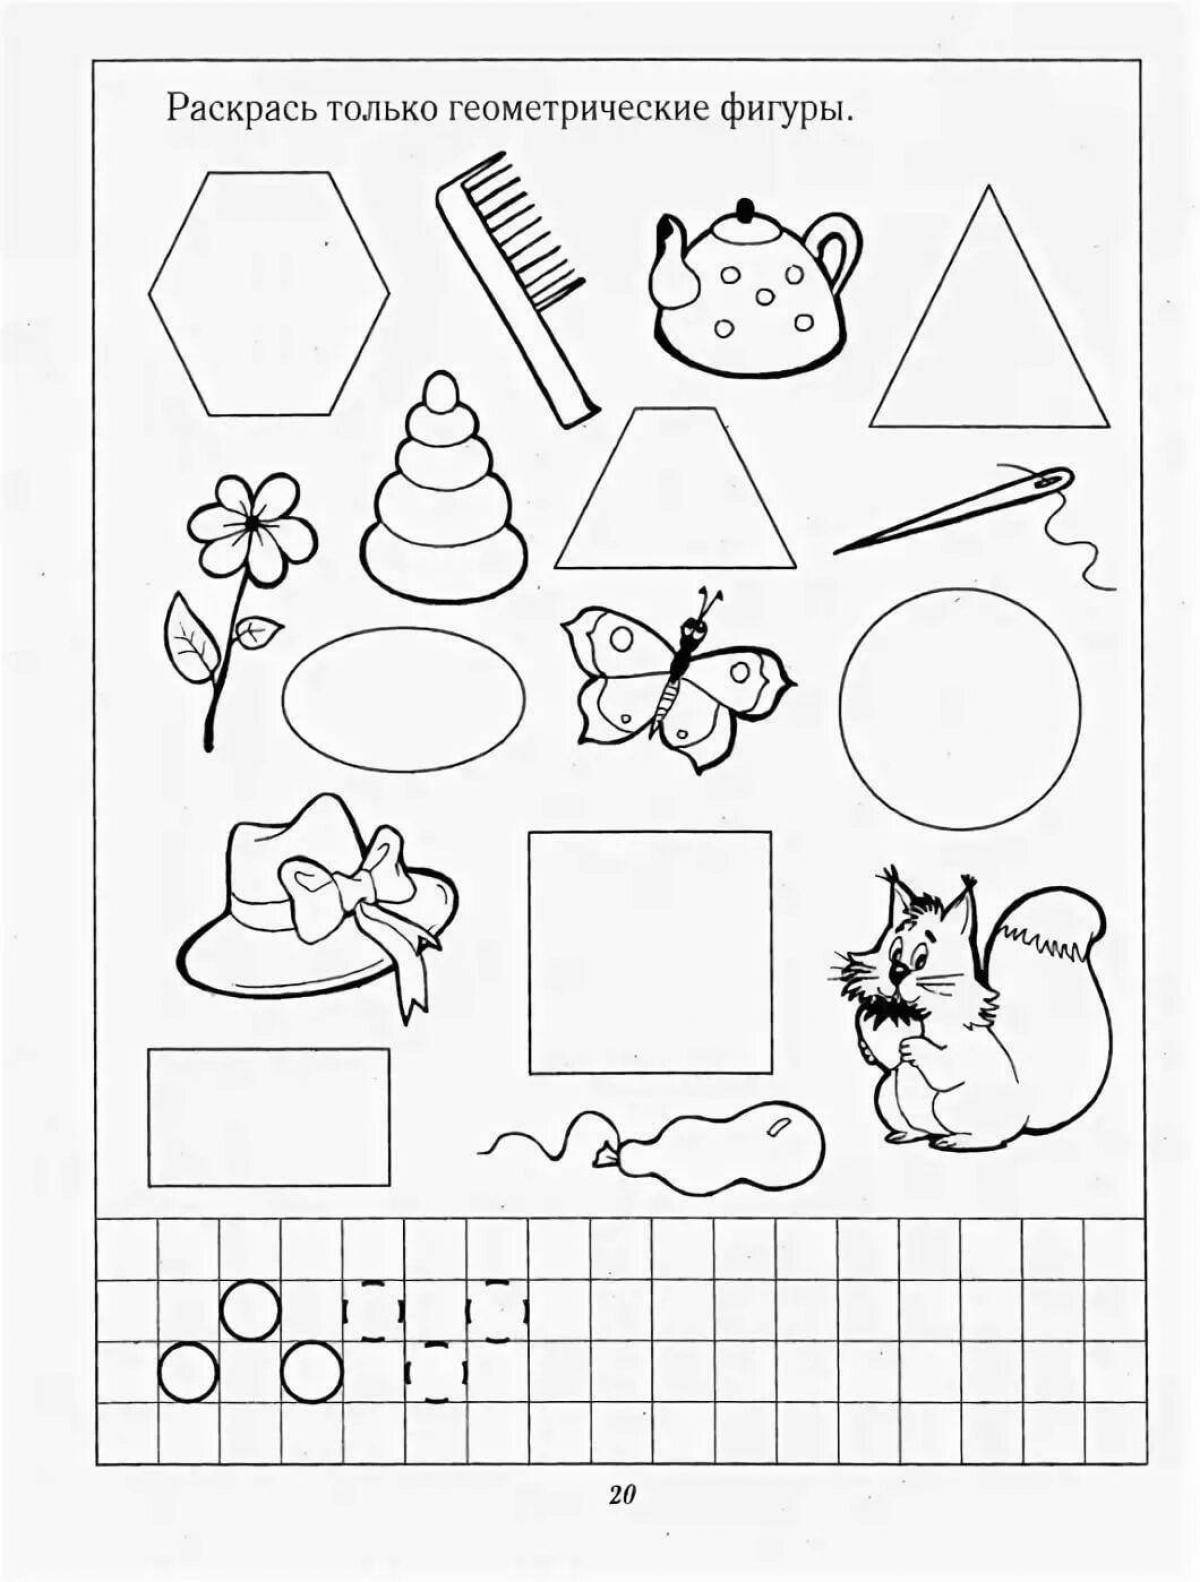 Colorful playful geometric shapes coloring book for preschoolers